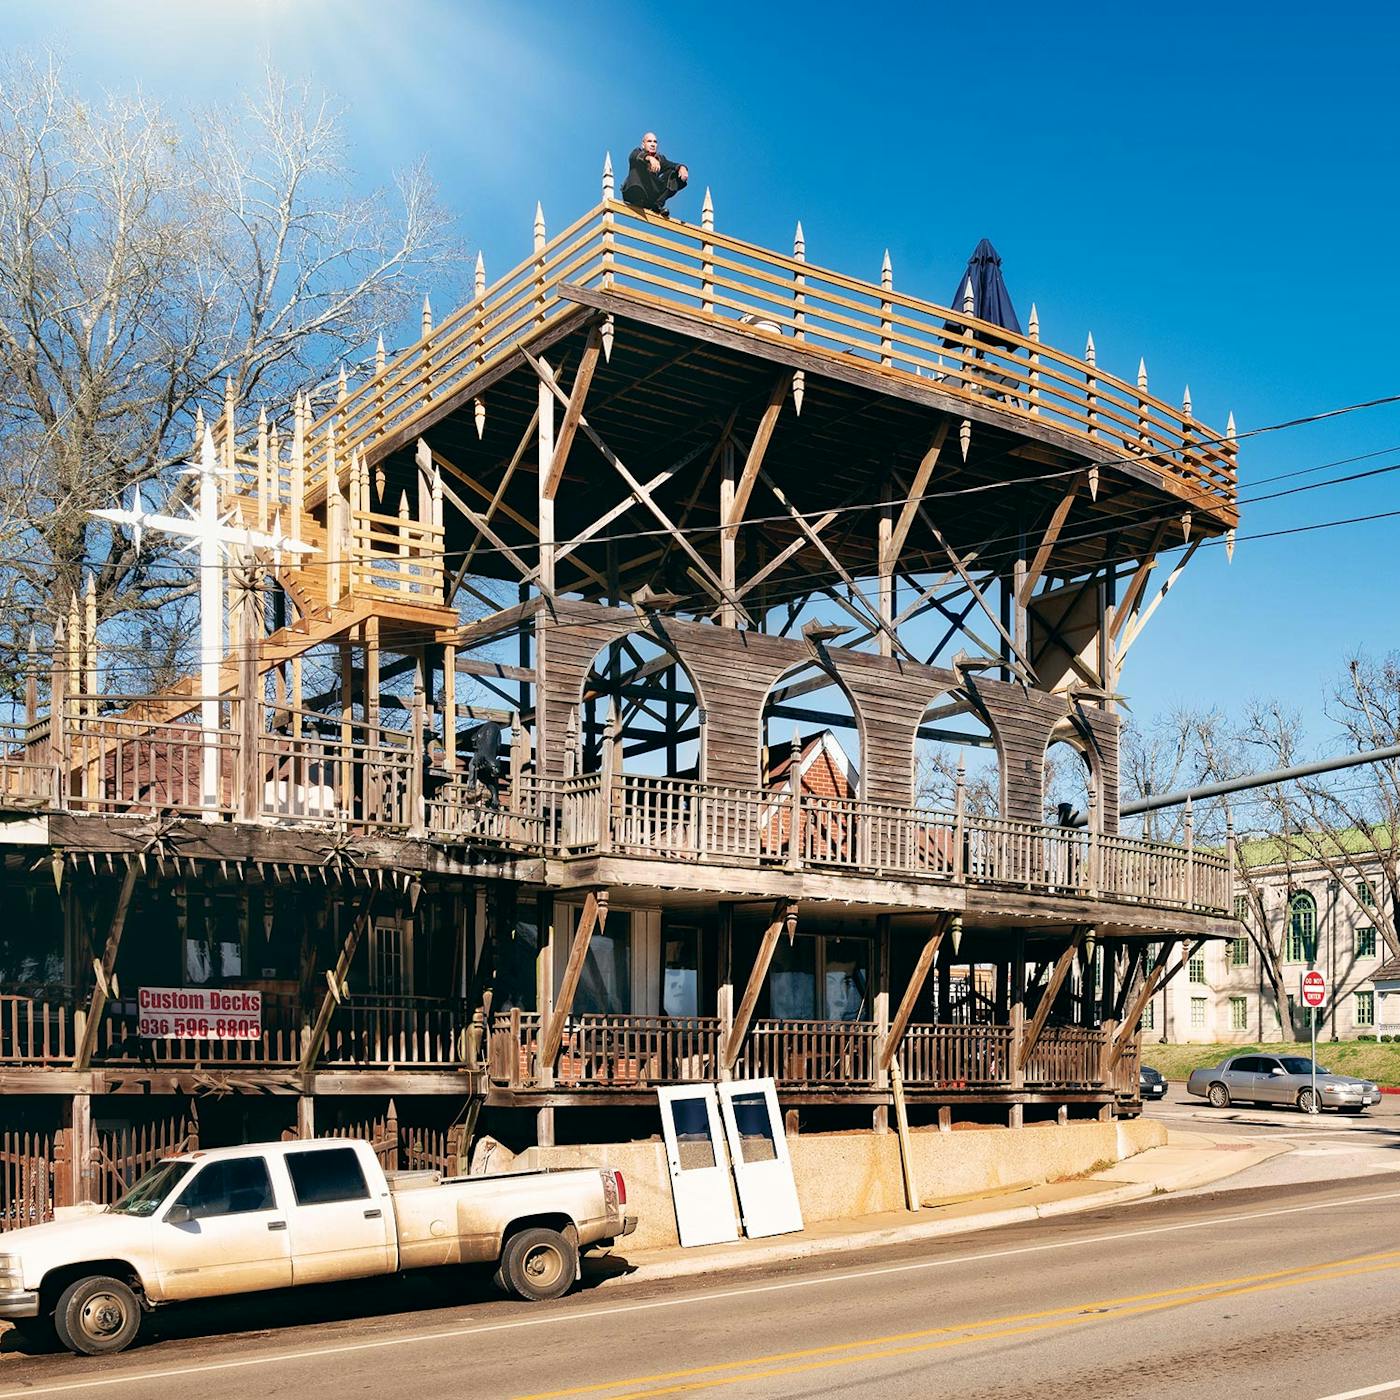 For Years An East Texas Carpenter Has Been Building A Gothic Contraption Of Decks And Spikes In A Historic Square Texas Monthly